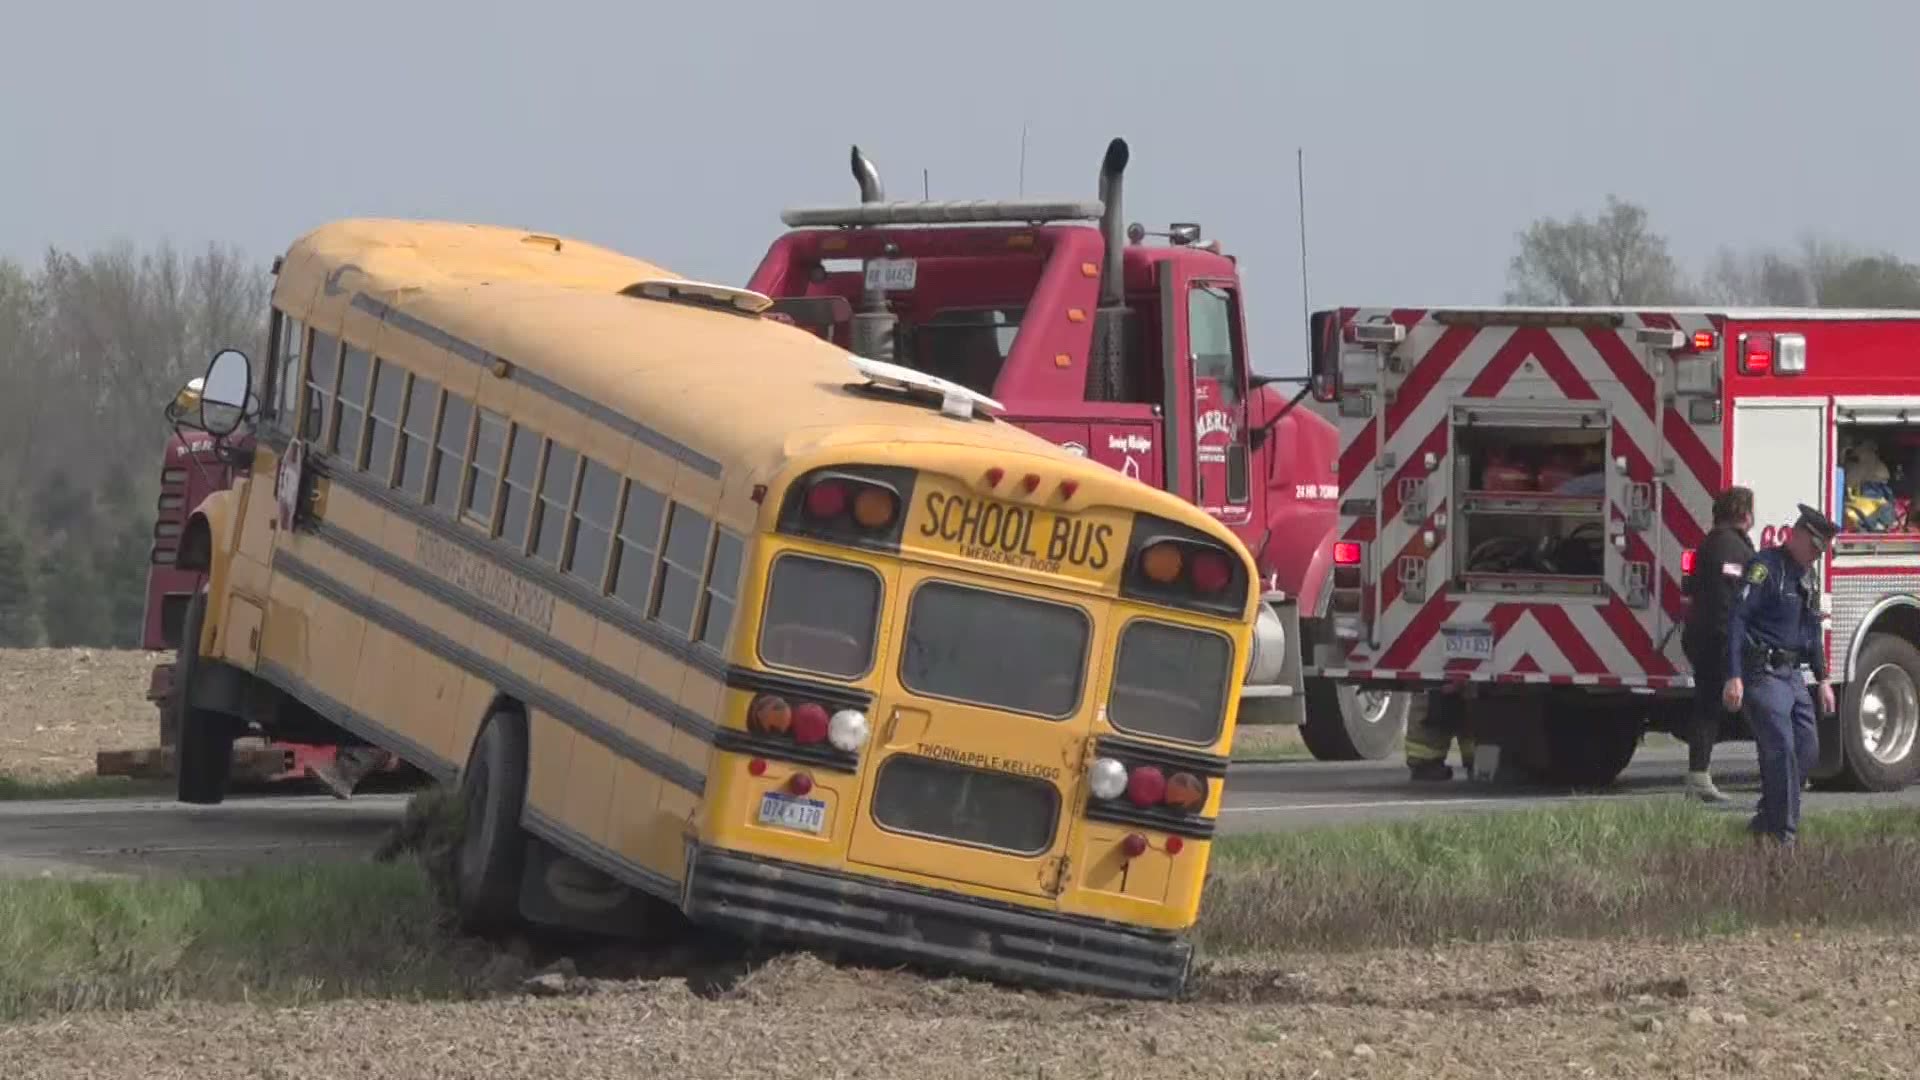 A Volvo collided with a school bus, which rolled over several times and ended upright, according to police.